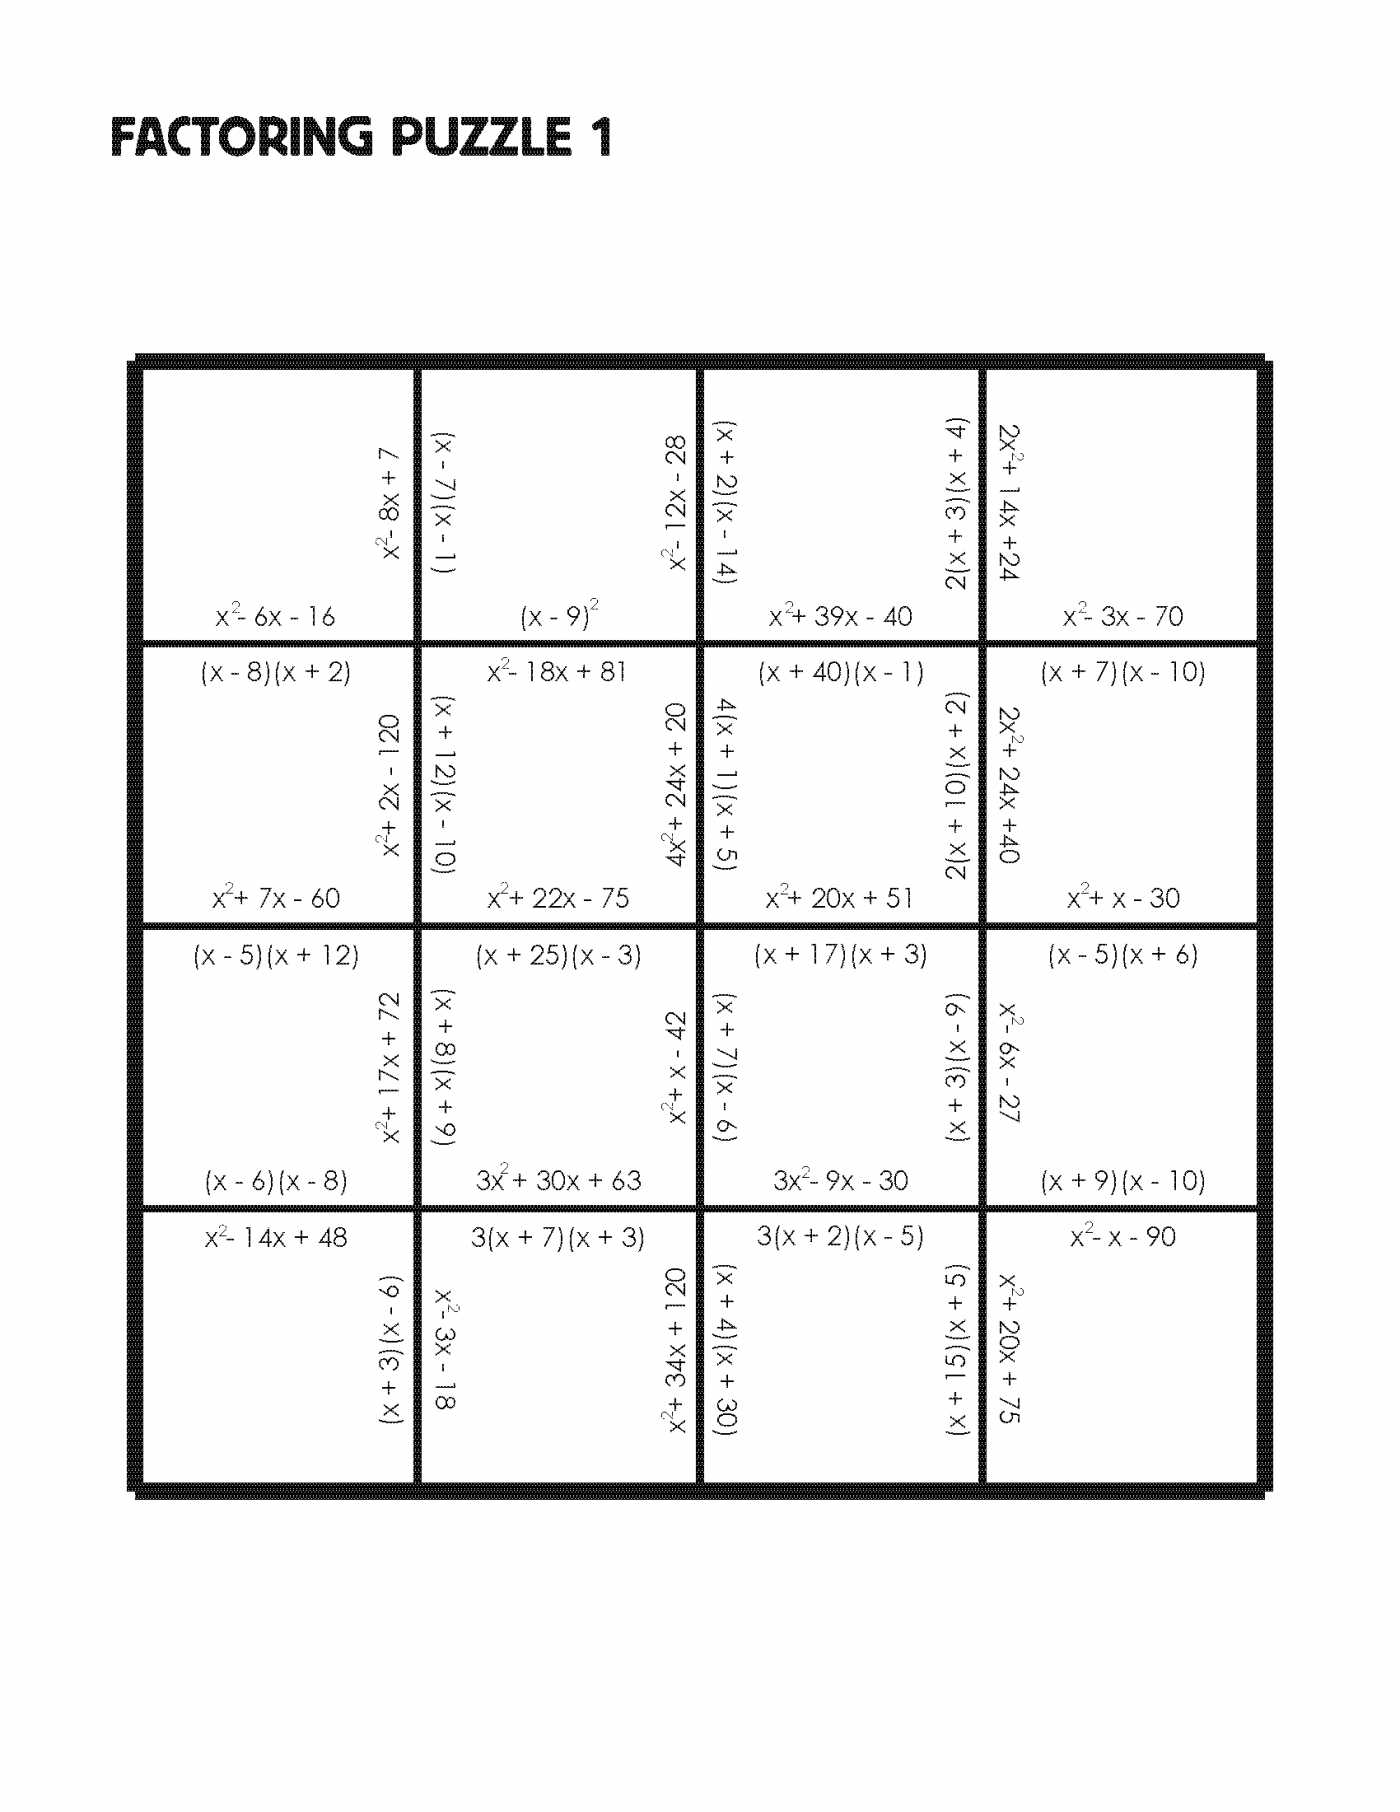 Factoring Perfect Square Trinomials Worksheet Also Crossword Algebra Puzzle Pdf Gallery Jymba Answers High 1 Resolution